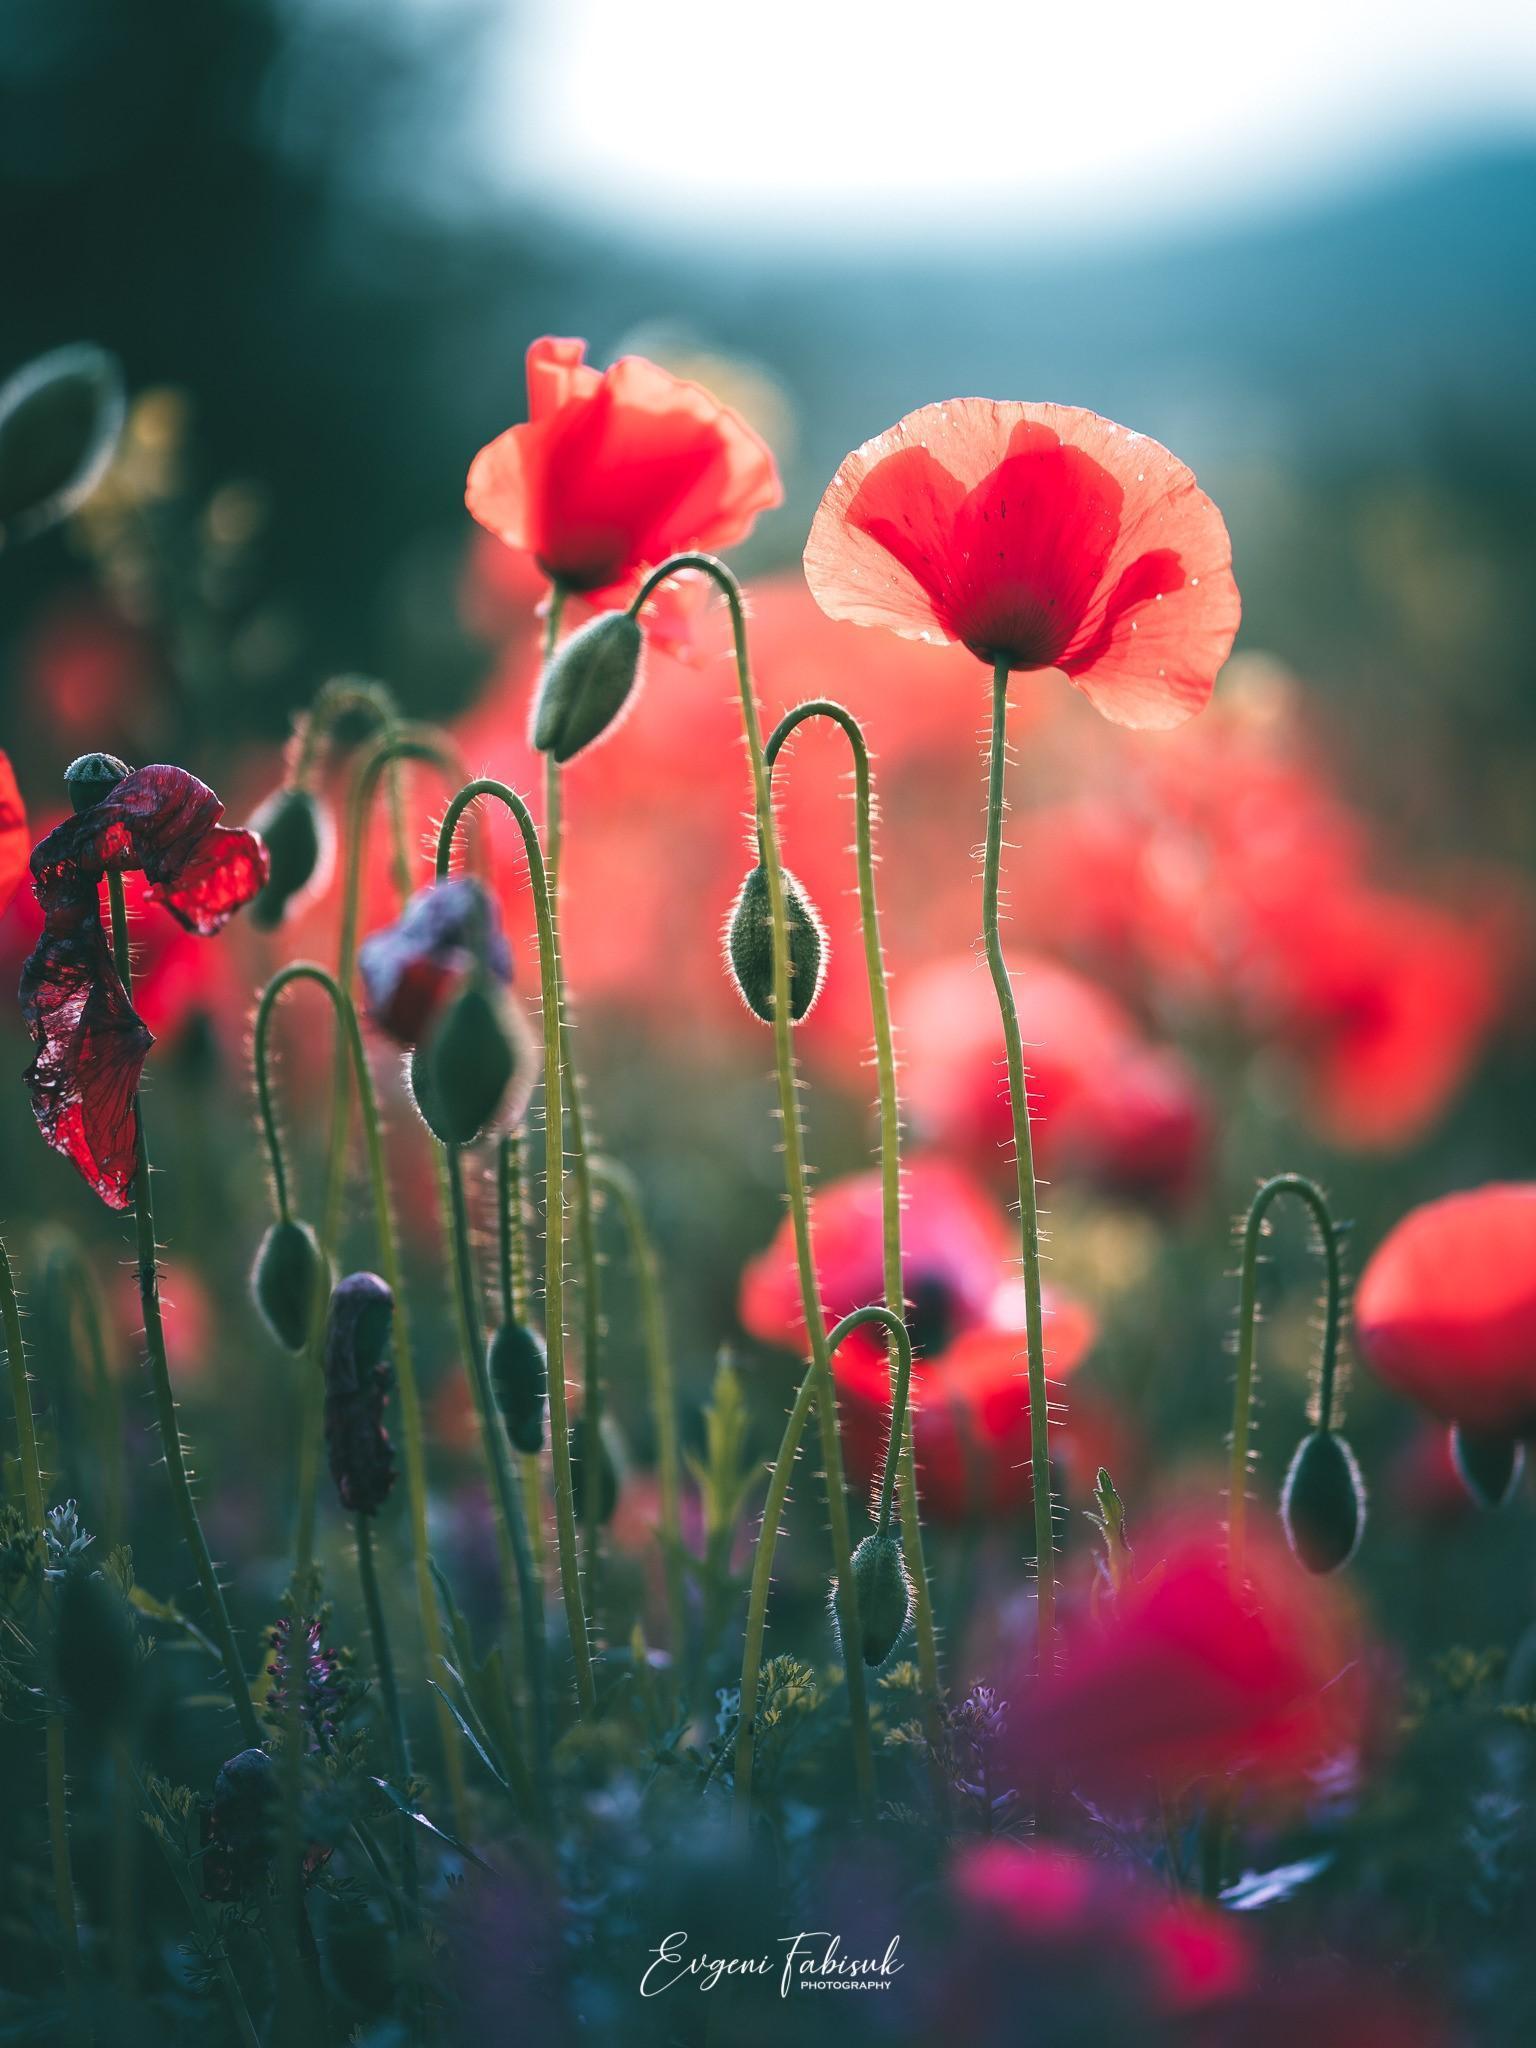 HD wallpaper, Landscape, Red, Leaves, Field, Nature, Evgeni Fabisuk, Plants, Grass, Photography, Green, Flowers, Poppies